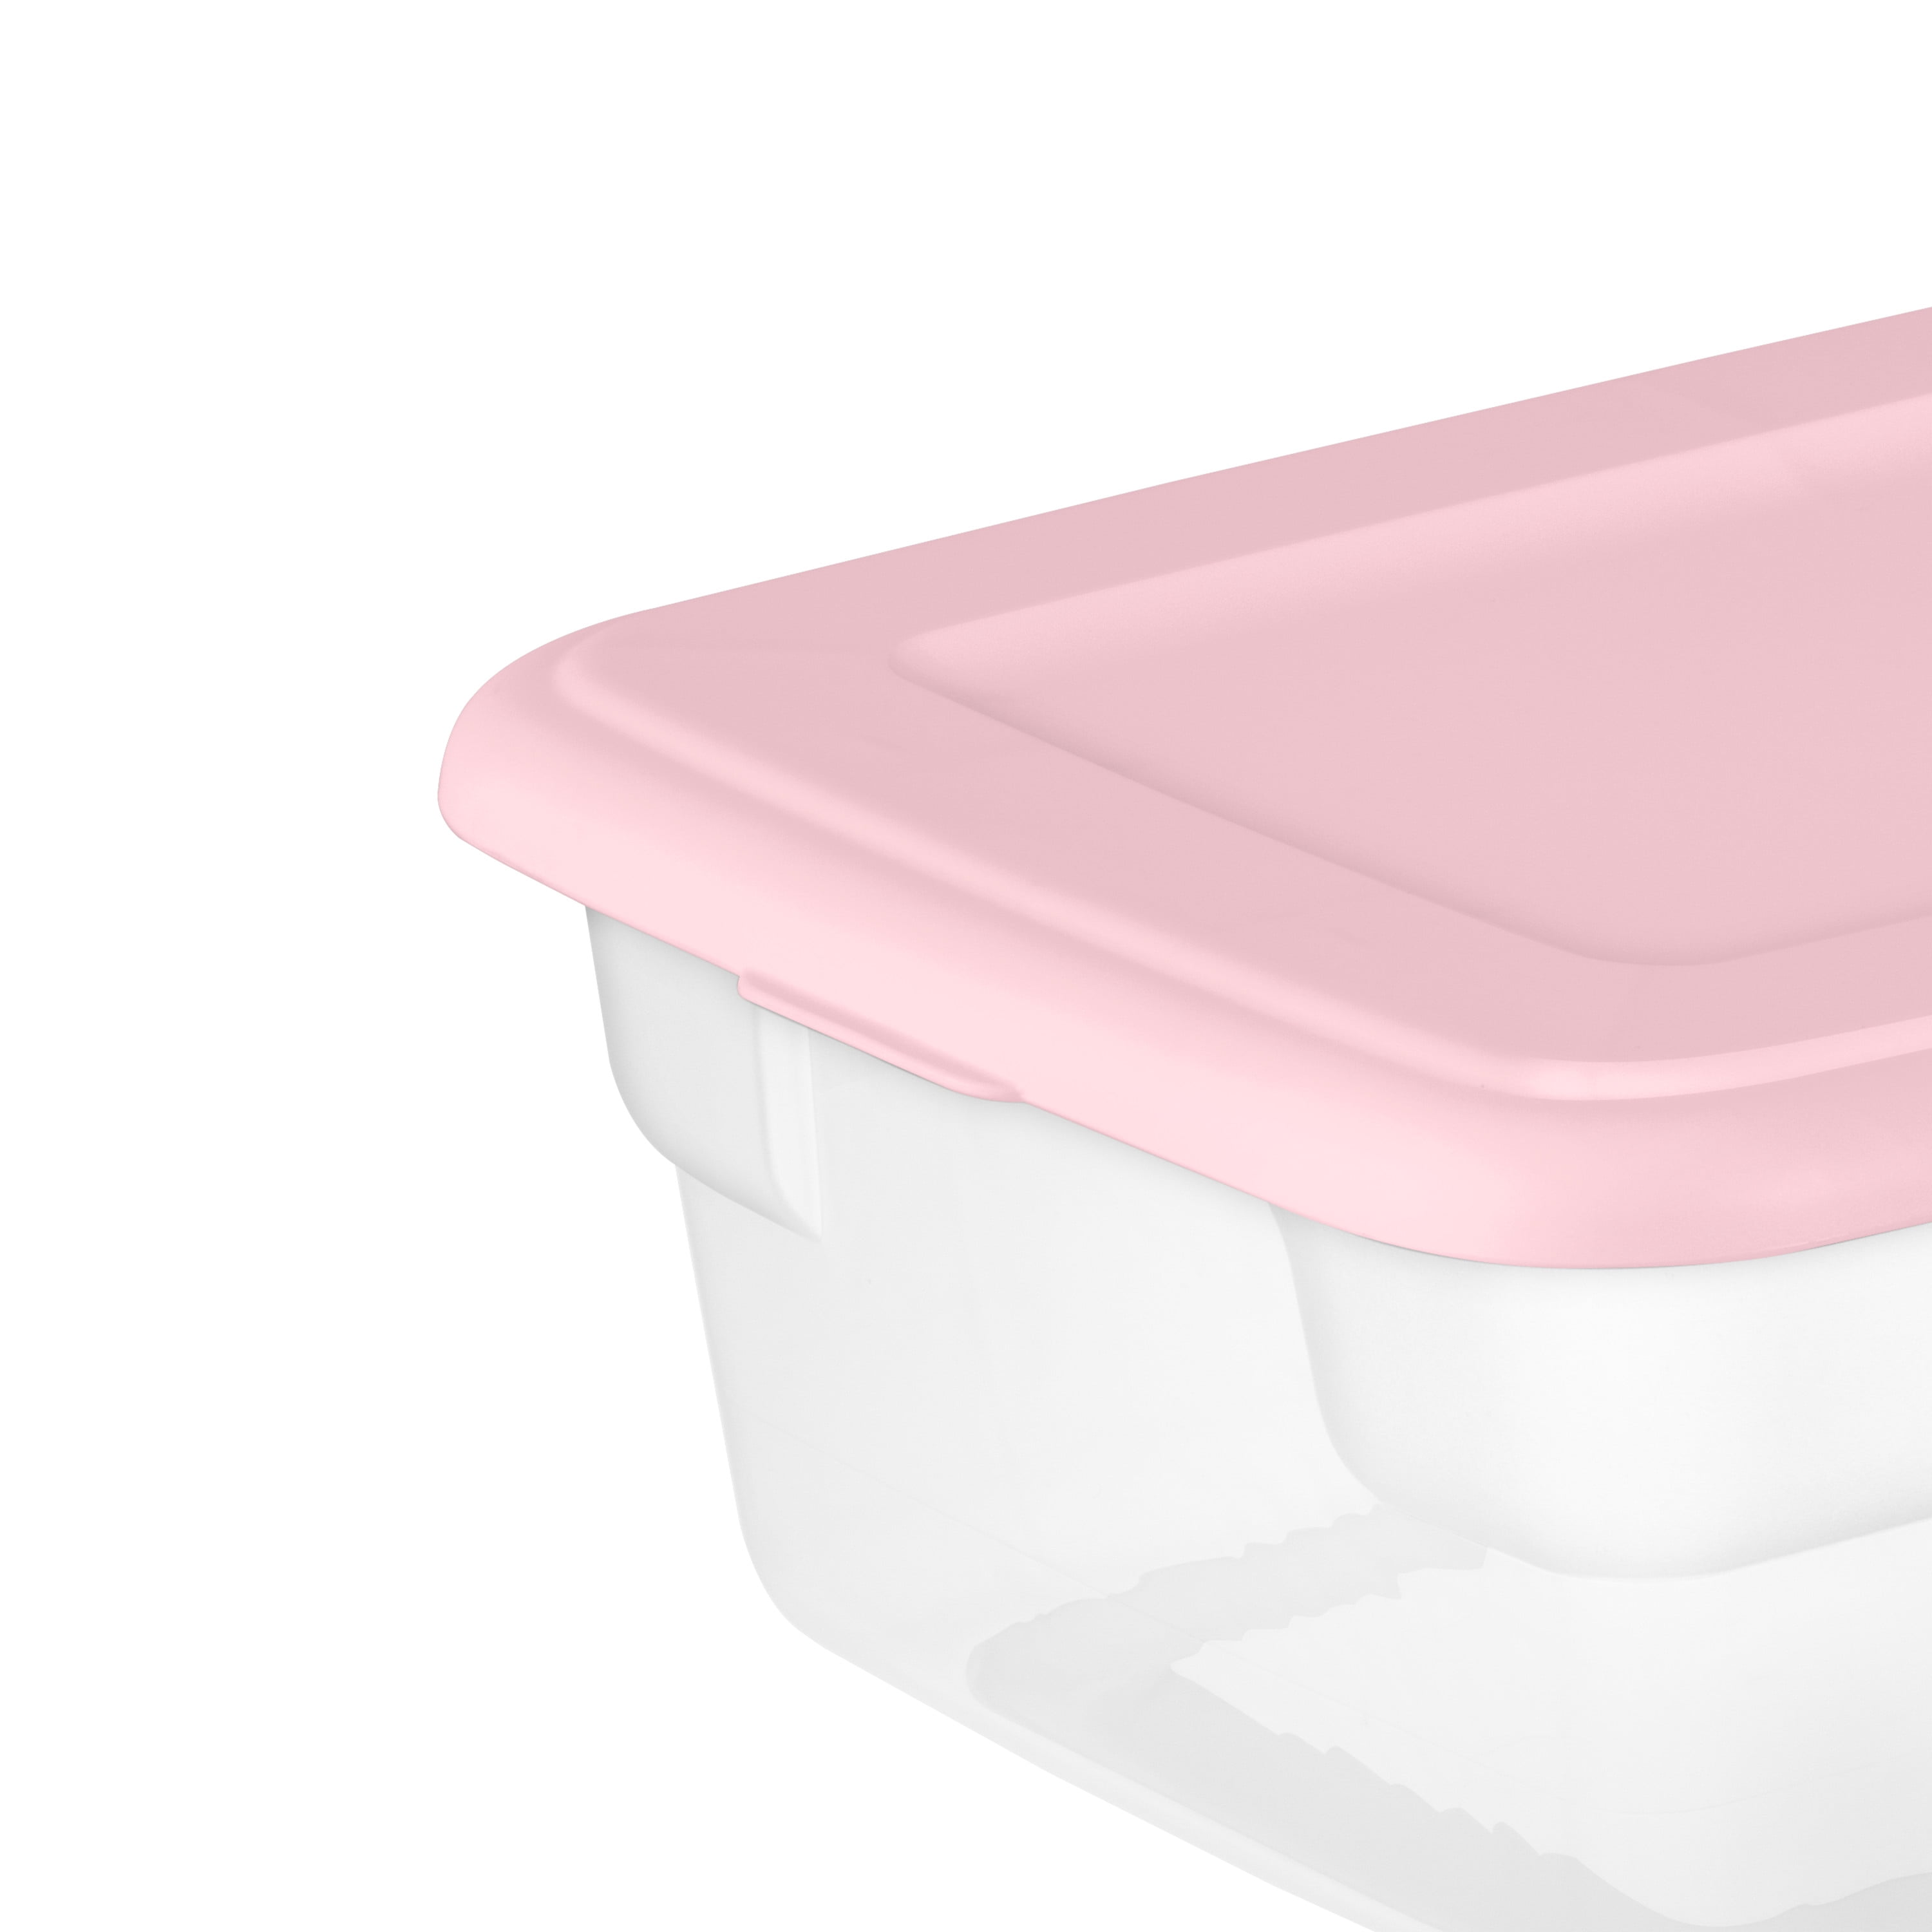 Pink container. – Present&Correct